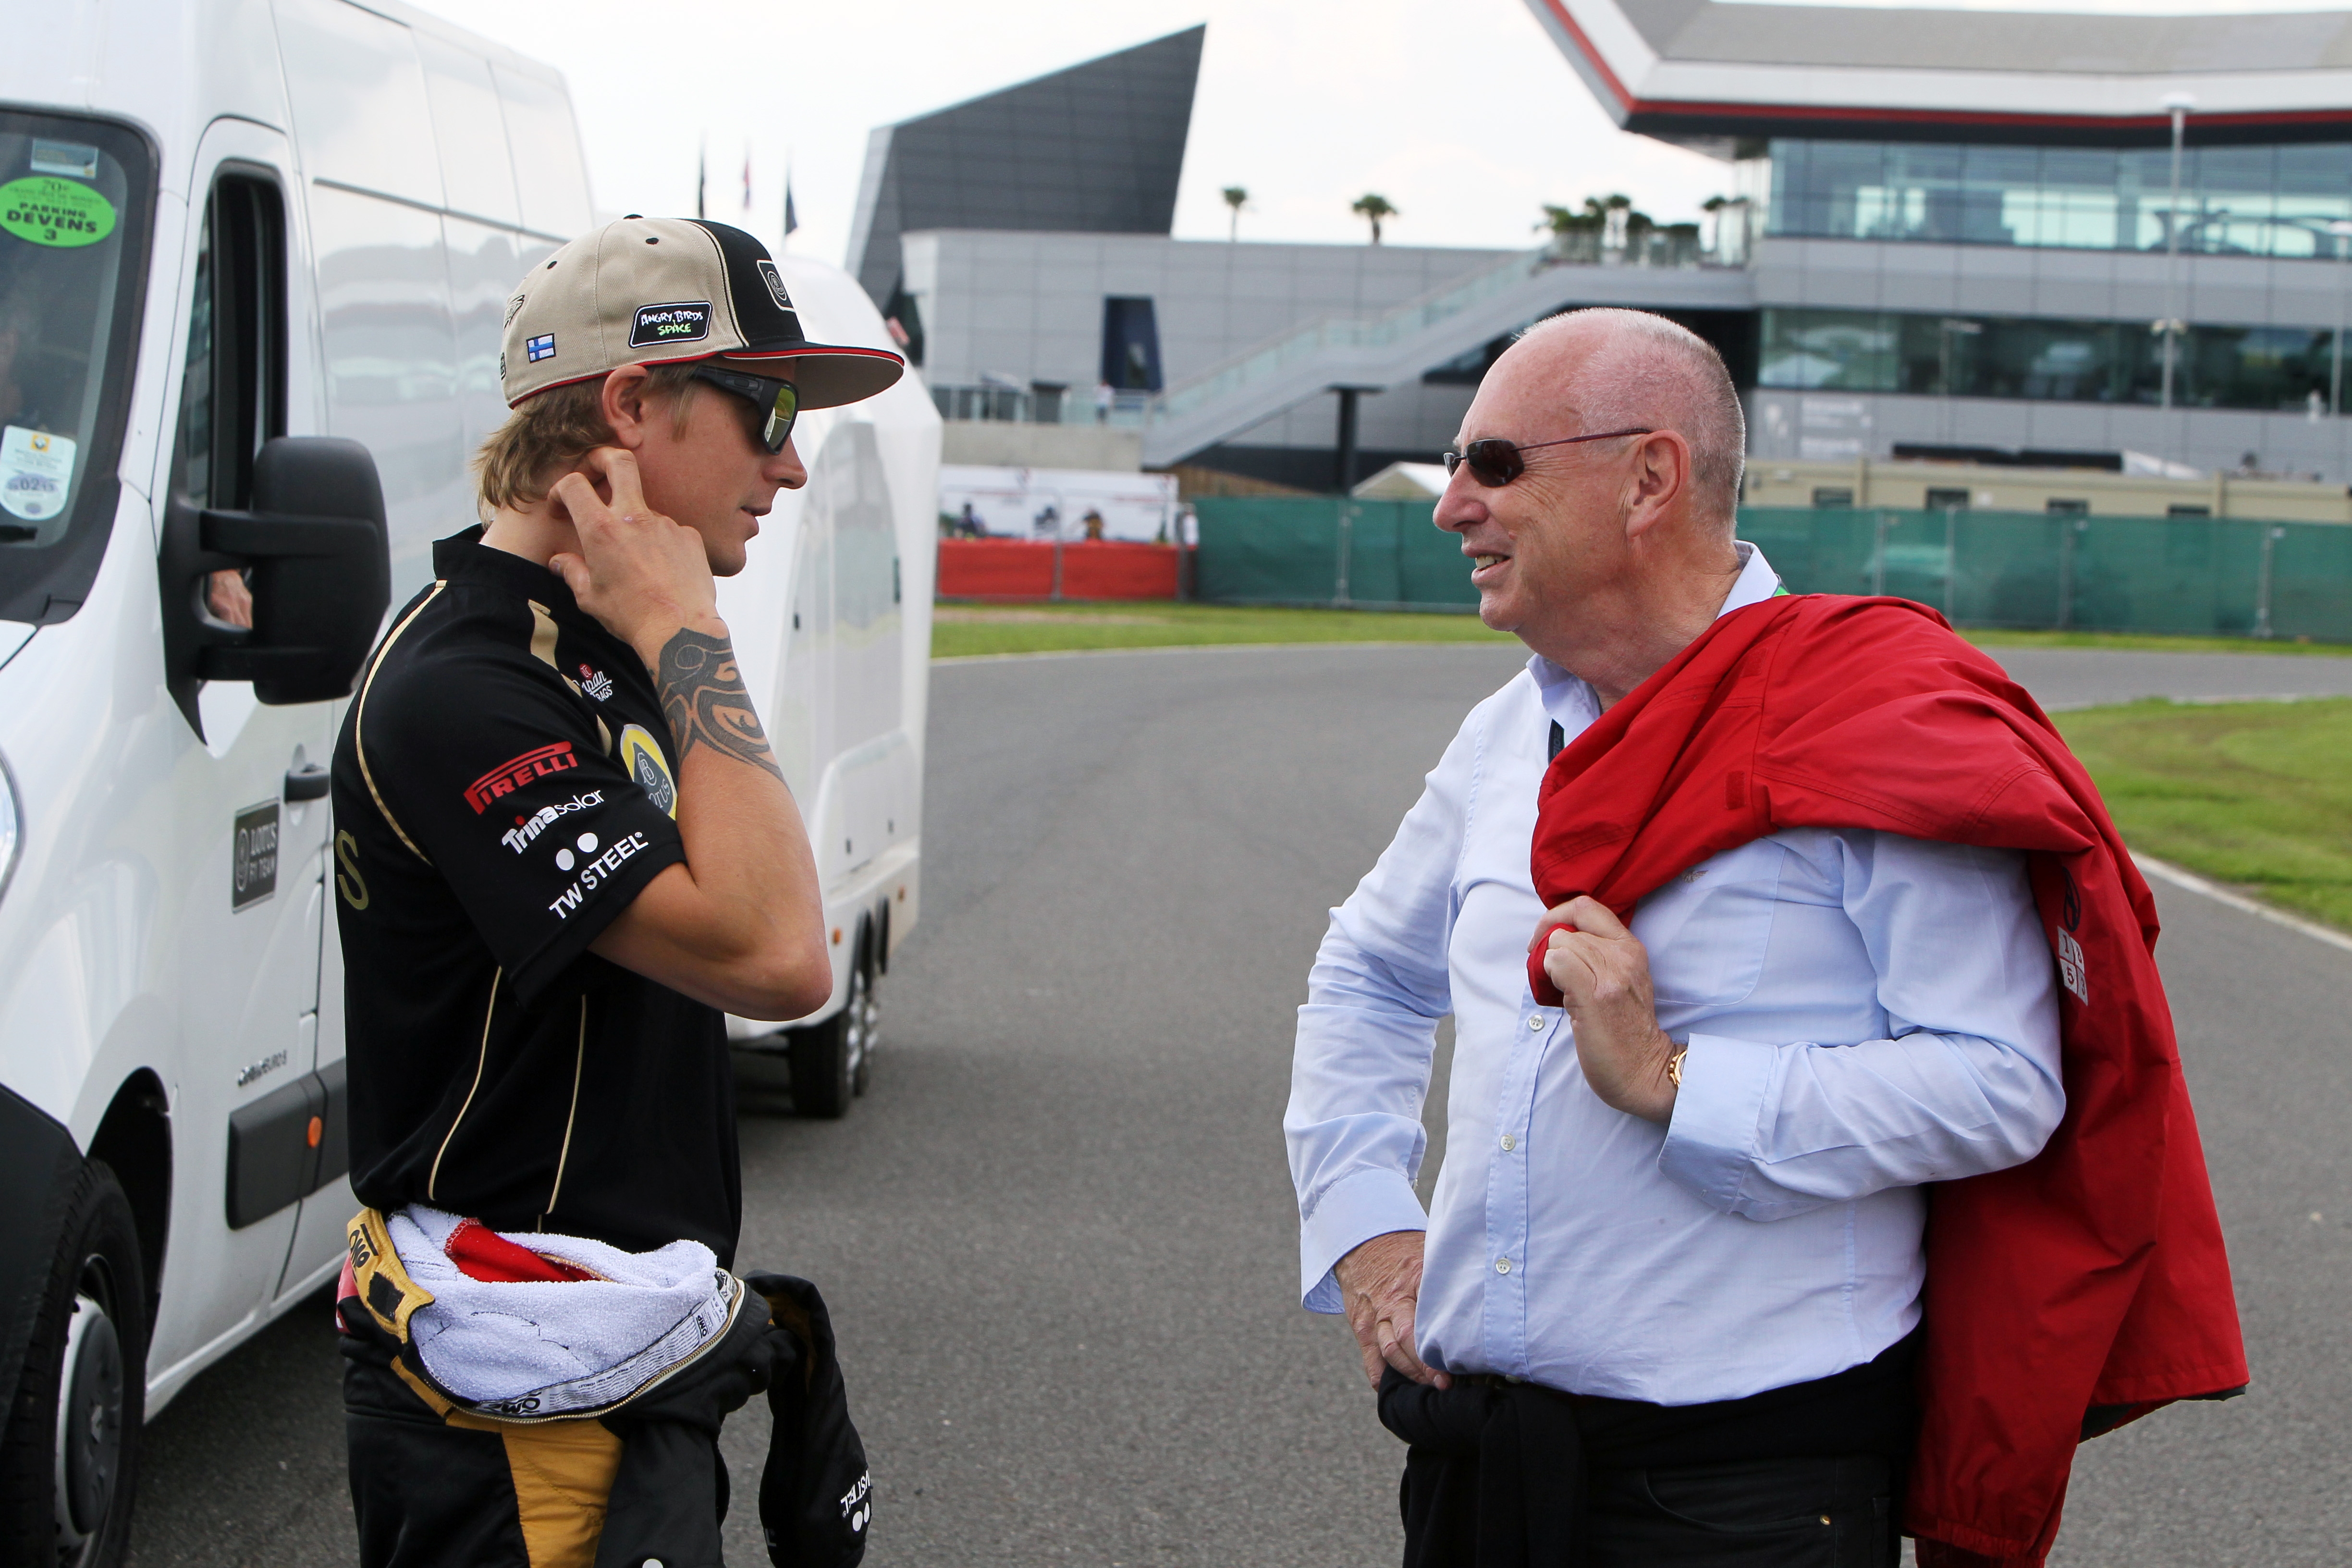 Peter Collins stands on the circuit to talk to kimi raikonnen at silverstone.